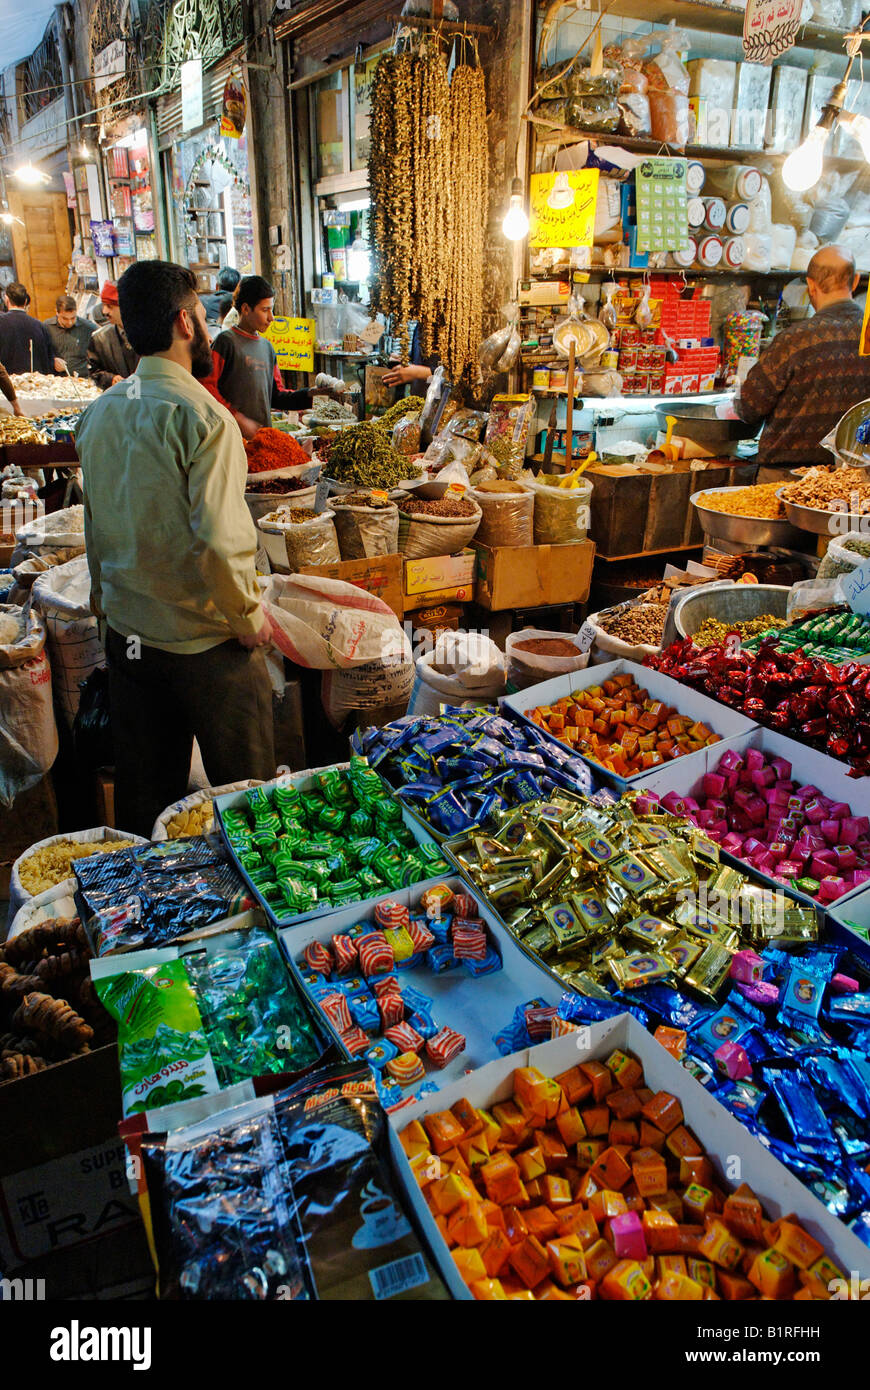 Spices and sweets in the souk, Damascus bazaar, UNESCO world heritage site, Syria, Arabia, Middle East Stock Photo